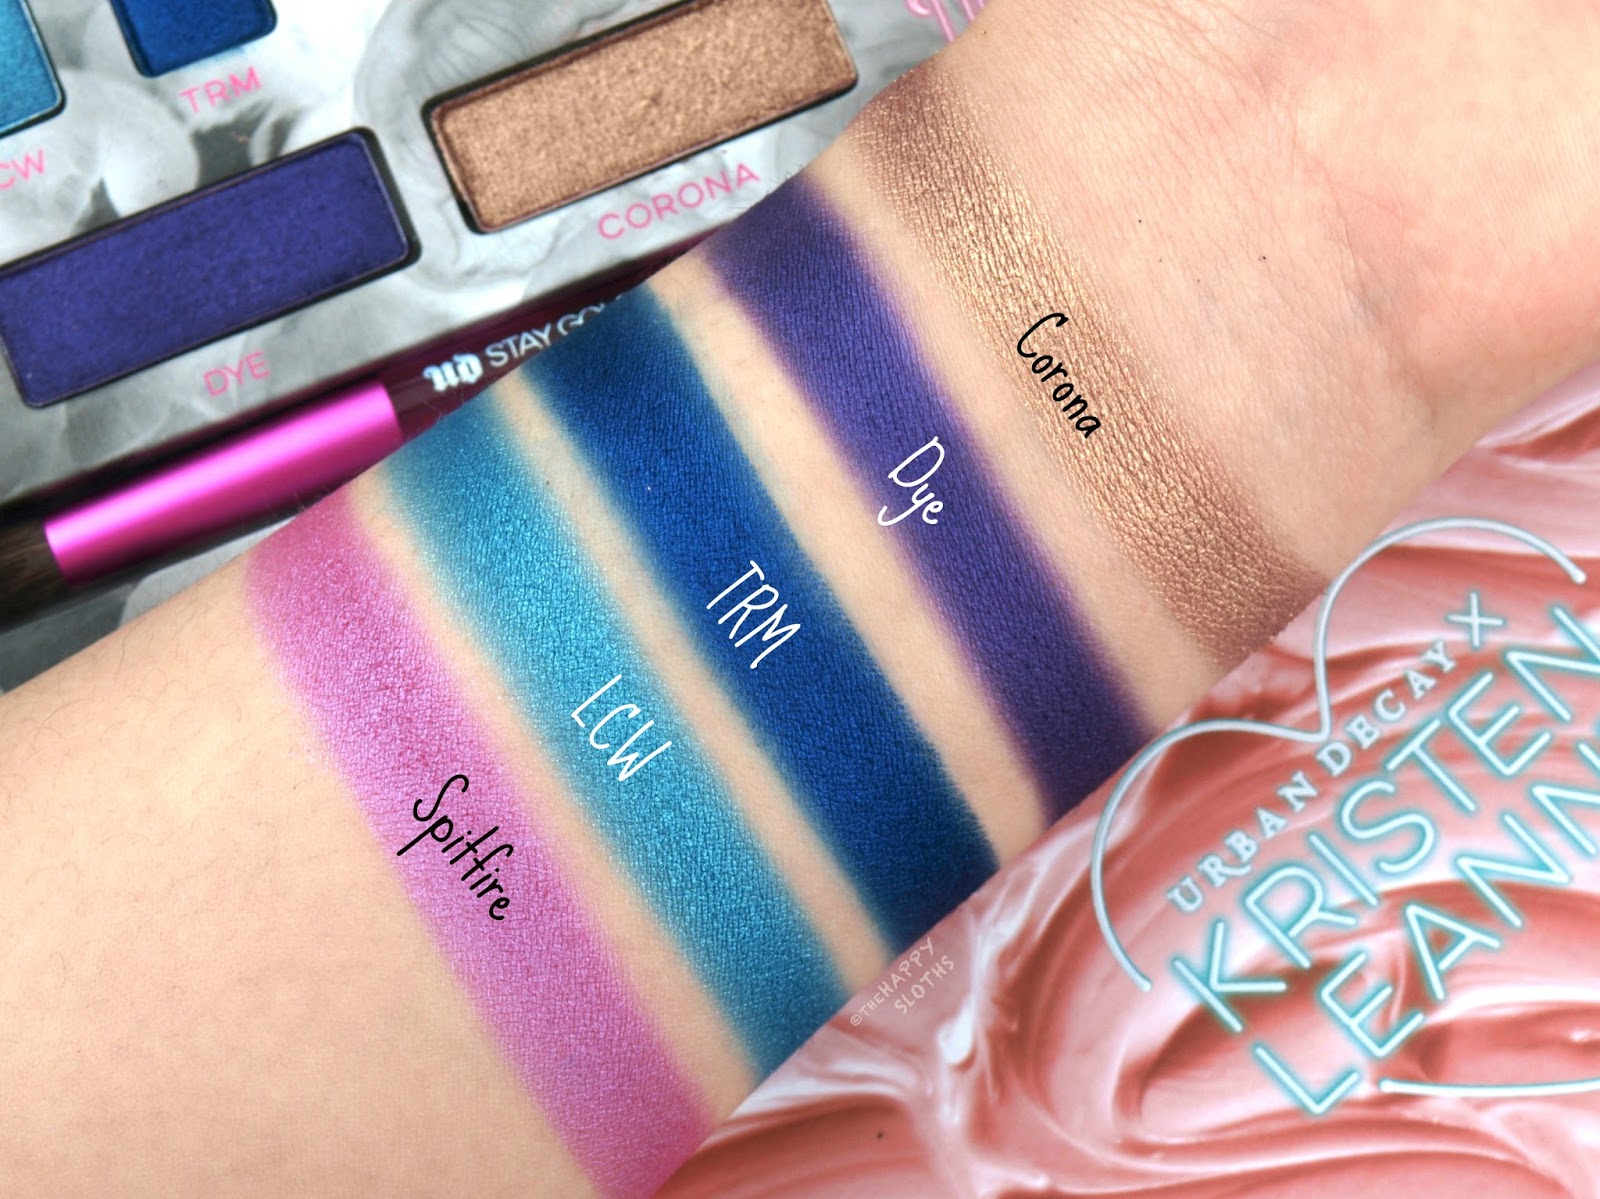 Urban Decay x Kristen Leanne Kaleidoscope Dream Eyeshadow Palette: Review and Swatches